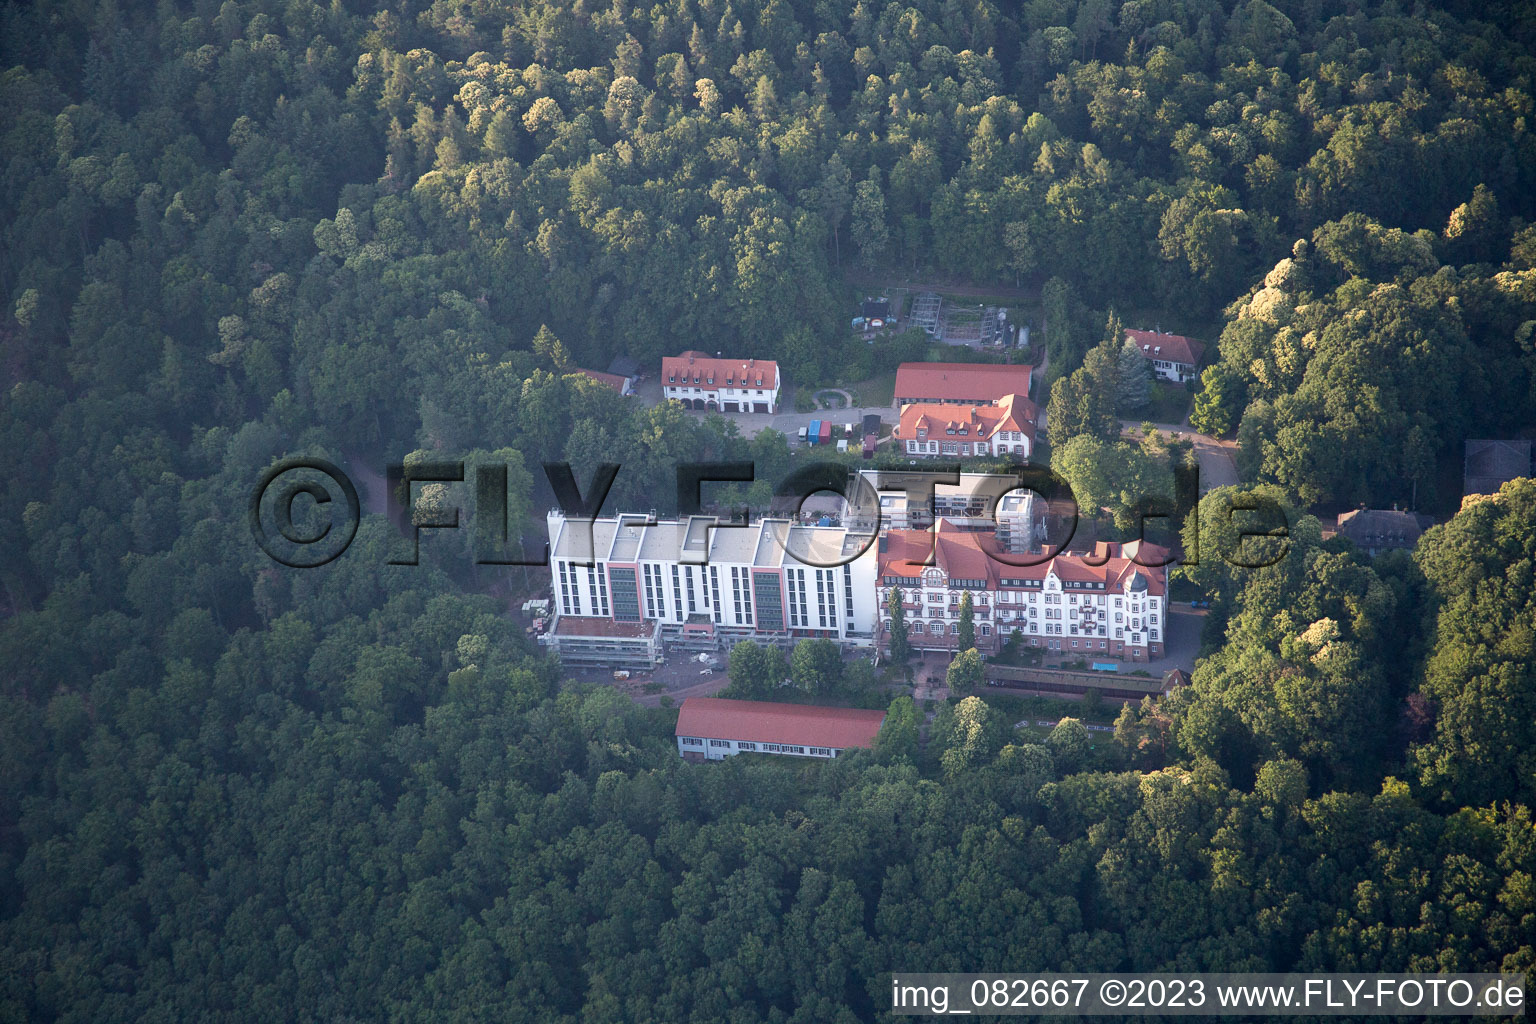 Clinic in Eußerthal in the state Rhineland-Palatinate, Germany seen from above